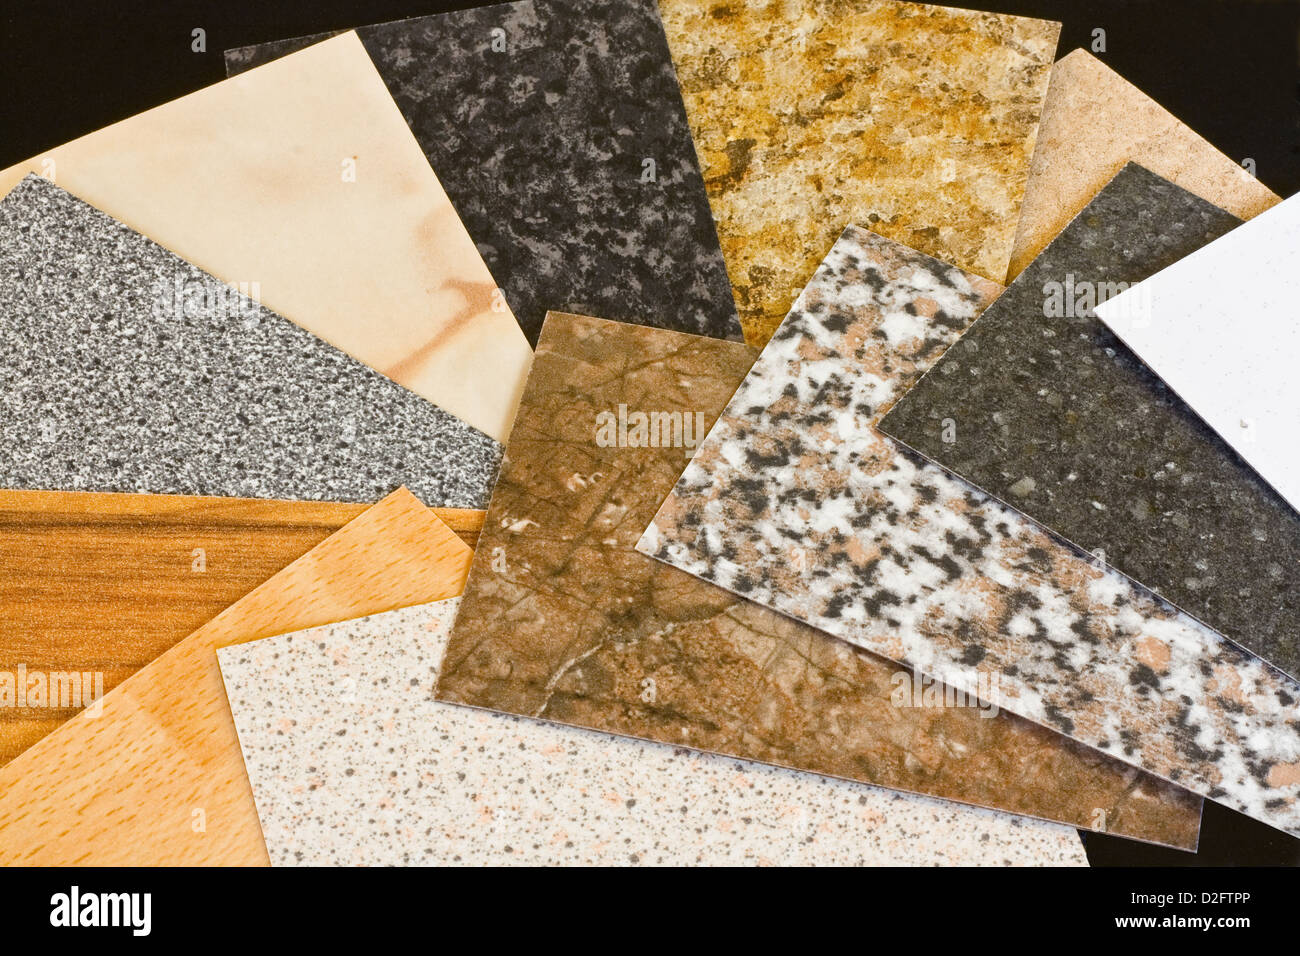 Kitchen worktop samples showing a variety of textured finishes available Stock Photo